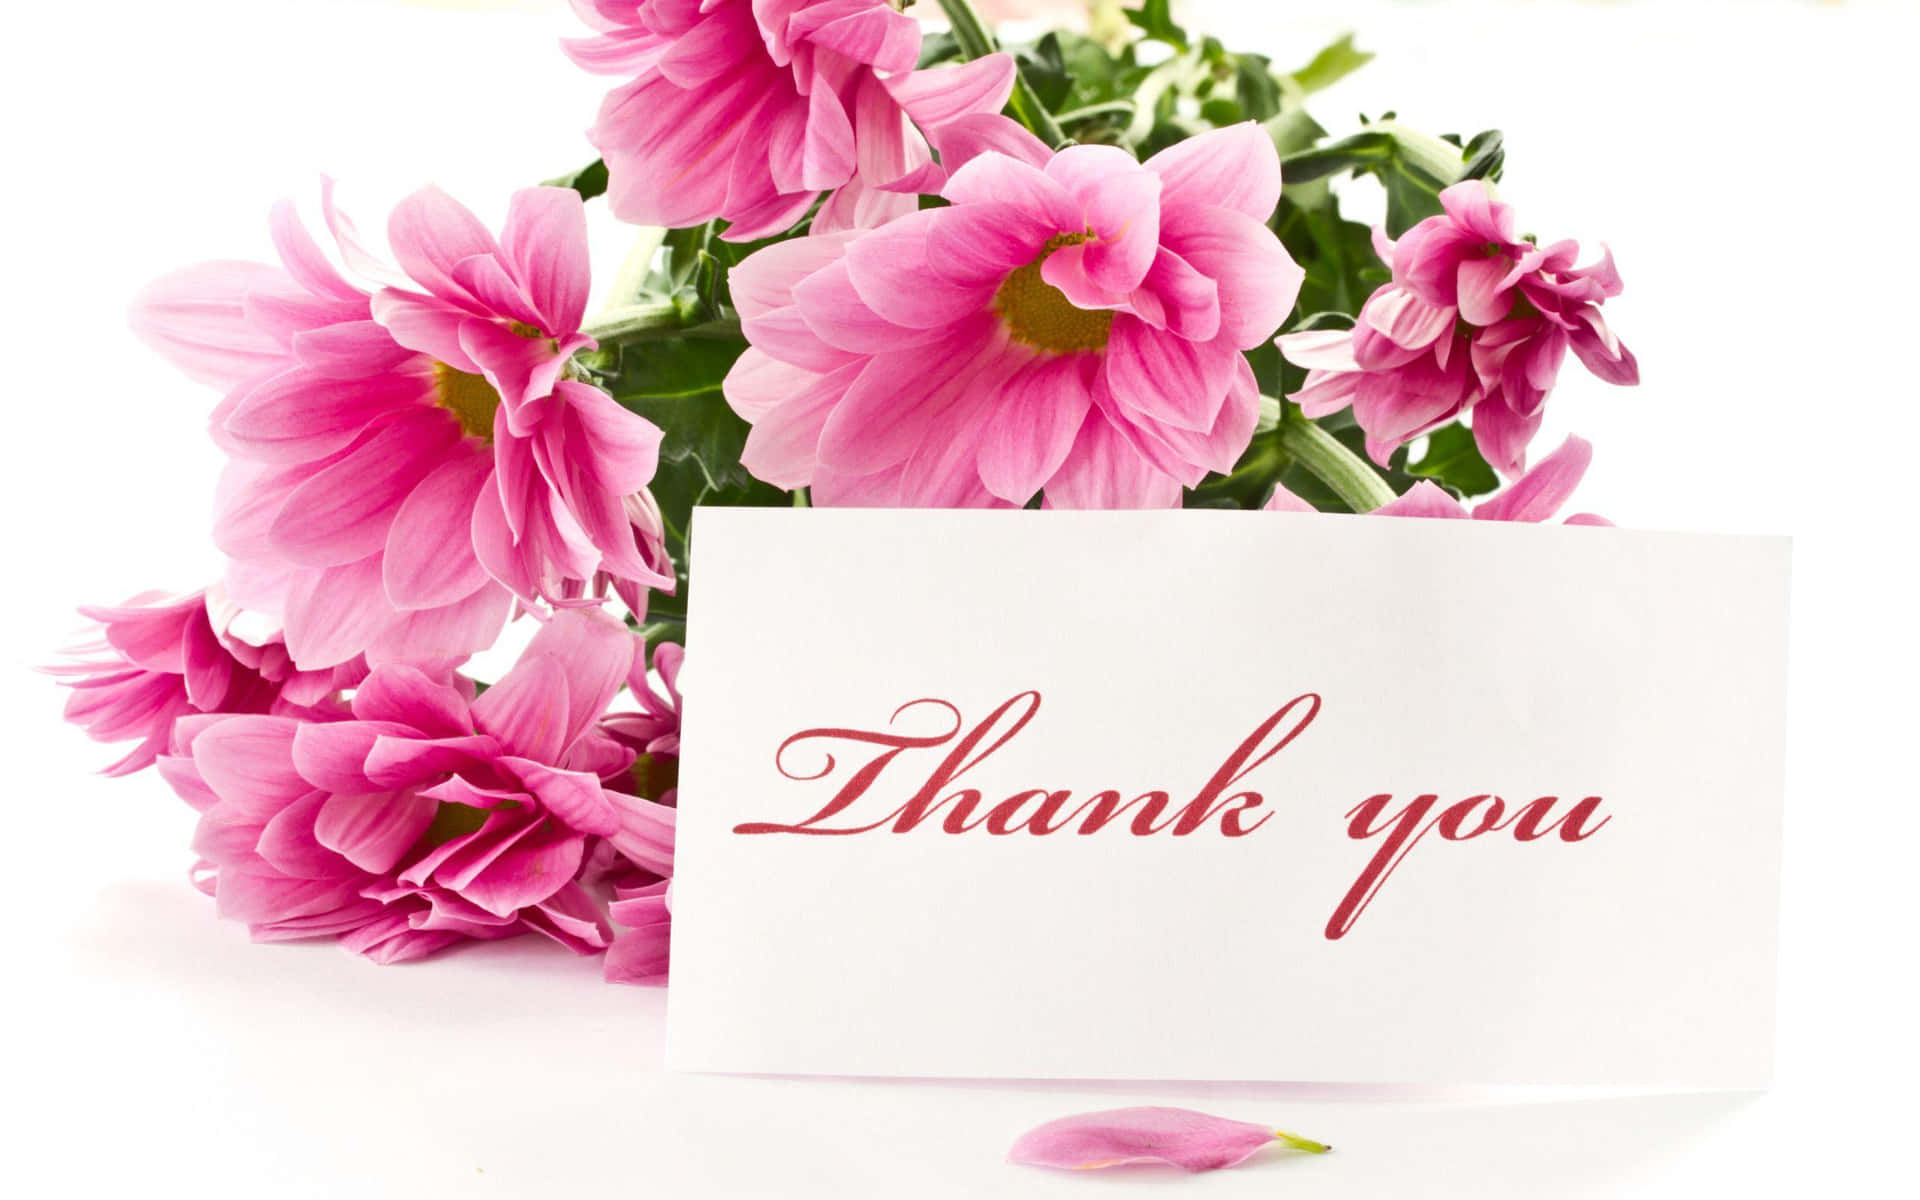 Elegant Thank You Background with Floral Design